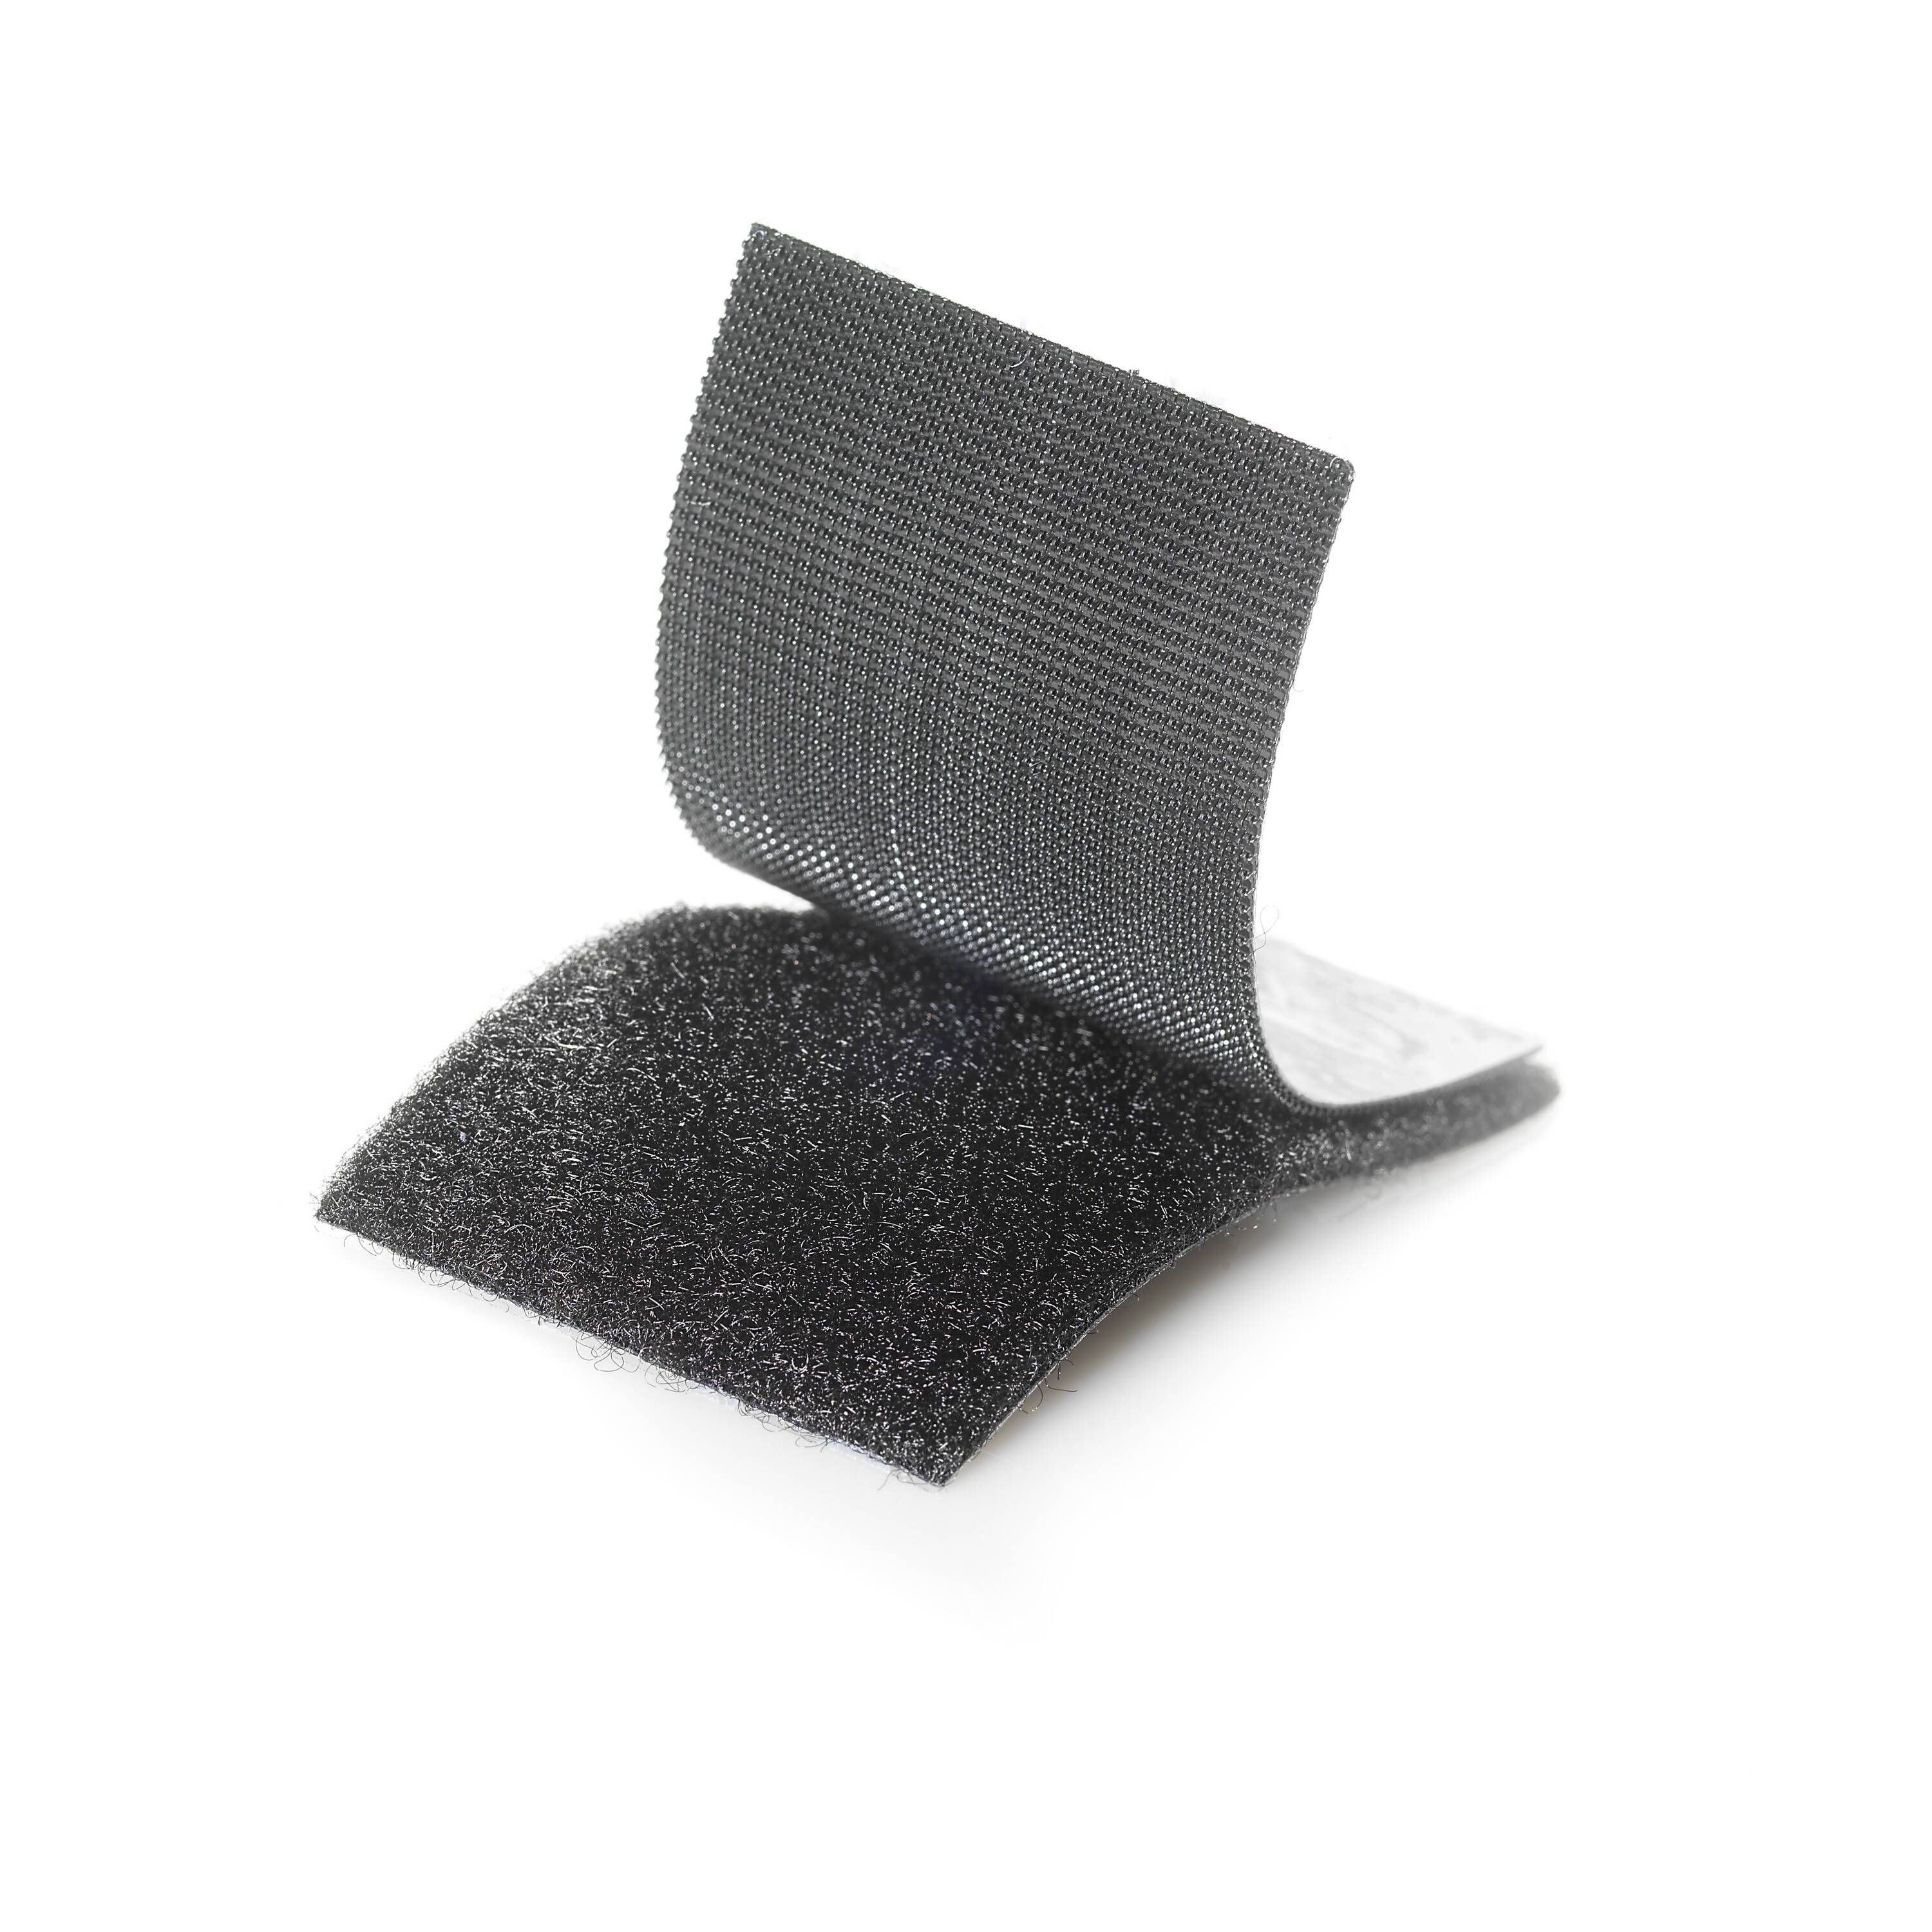 VELCRO Brand - Industrial Strength | Indoor & Outdoor Use | Superior  Holding Power on Smooth Surfaces | Size 4ft x 2in | Tape, Black - Pack of  1